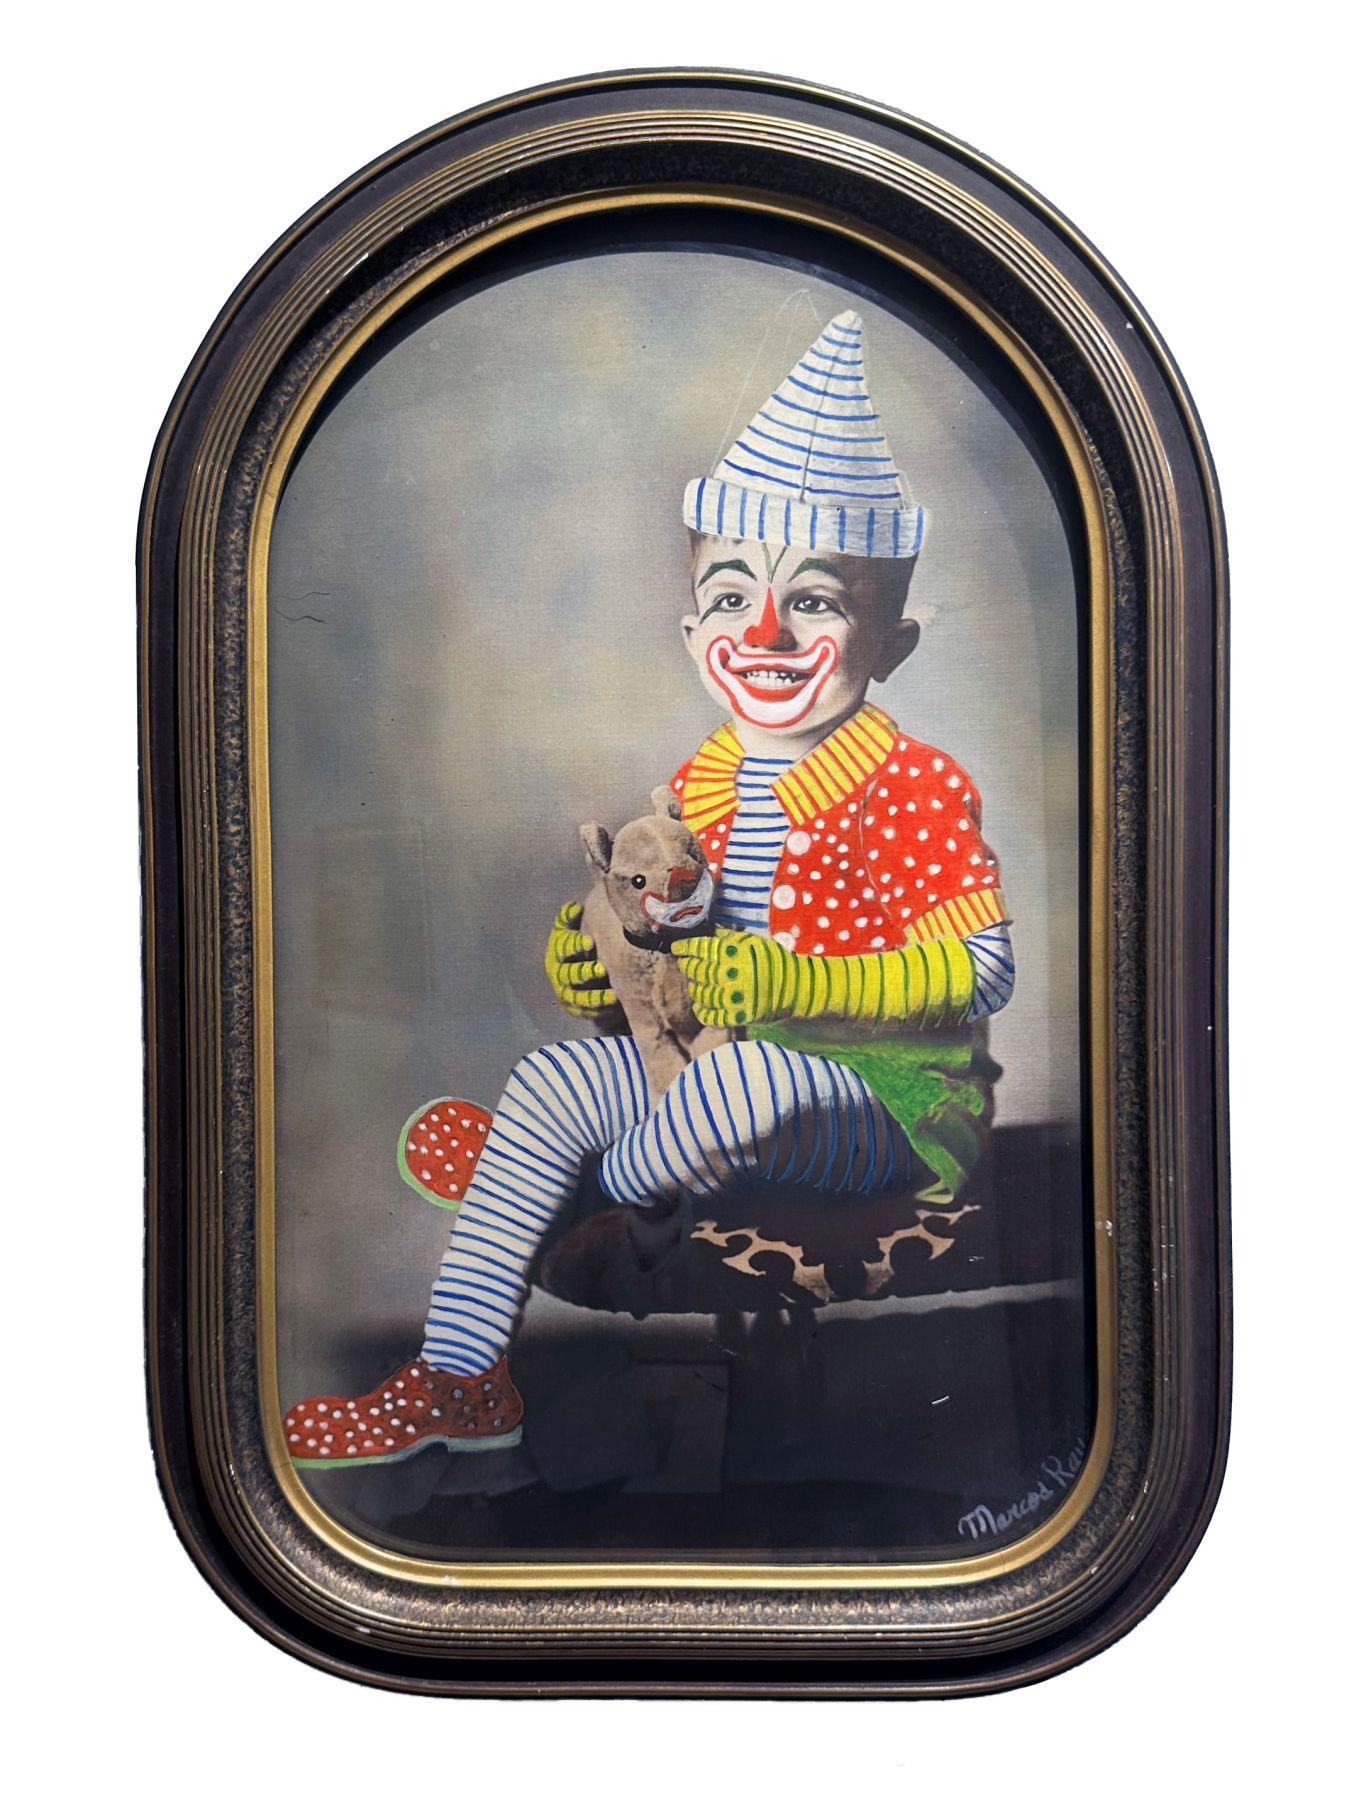 Baby Clown - Antique Painted Photograph in Frame - Mixed Media Art by Marcos Raya